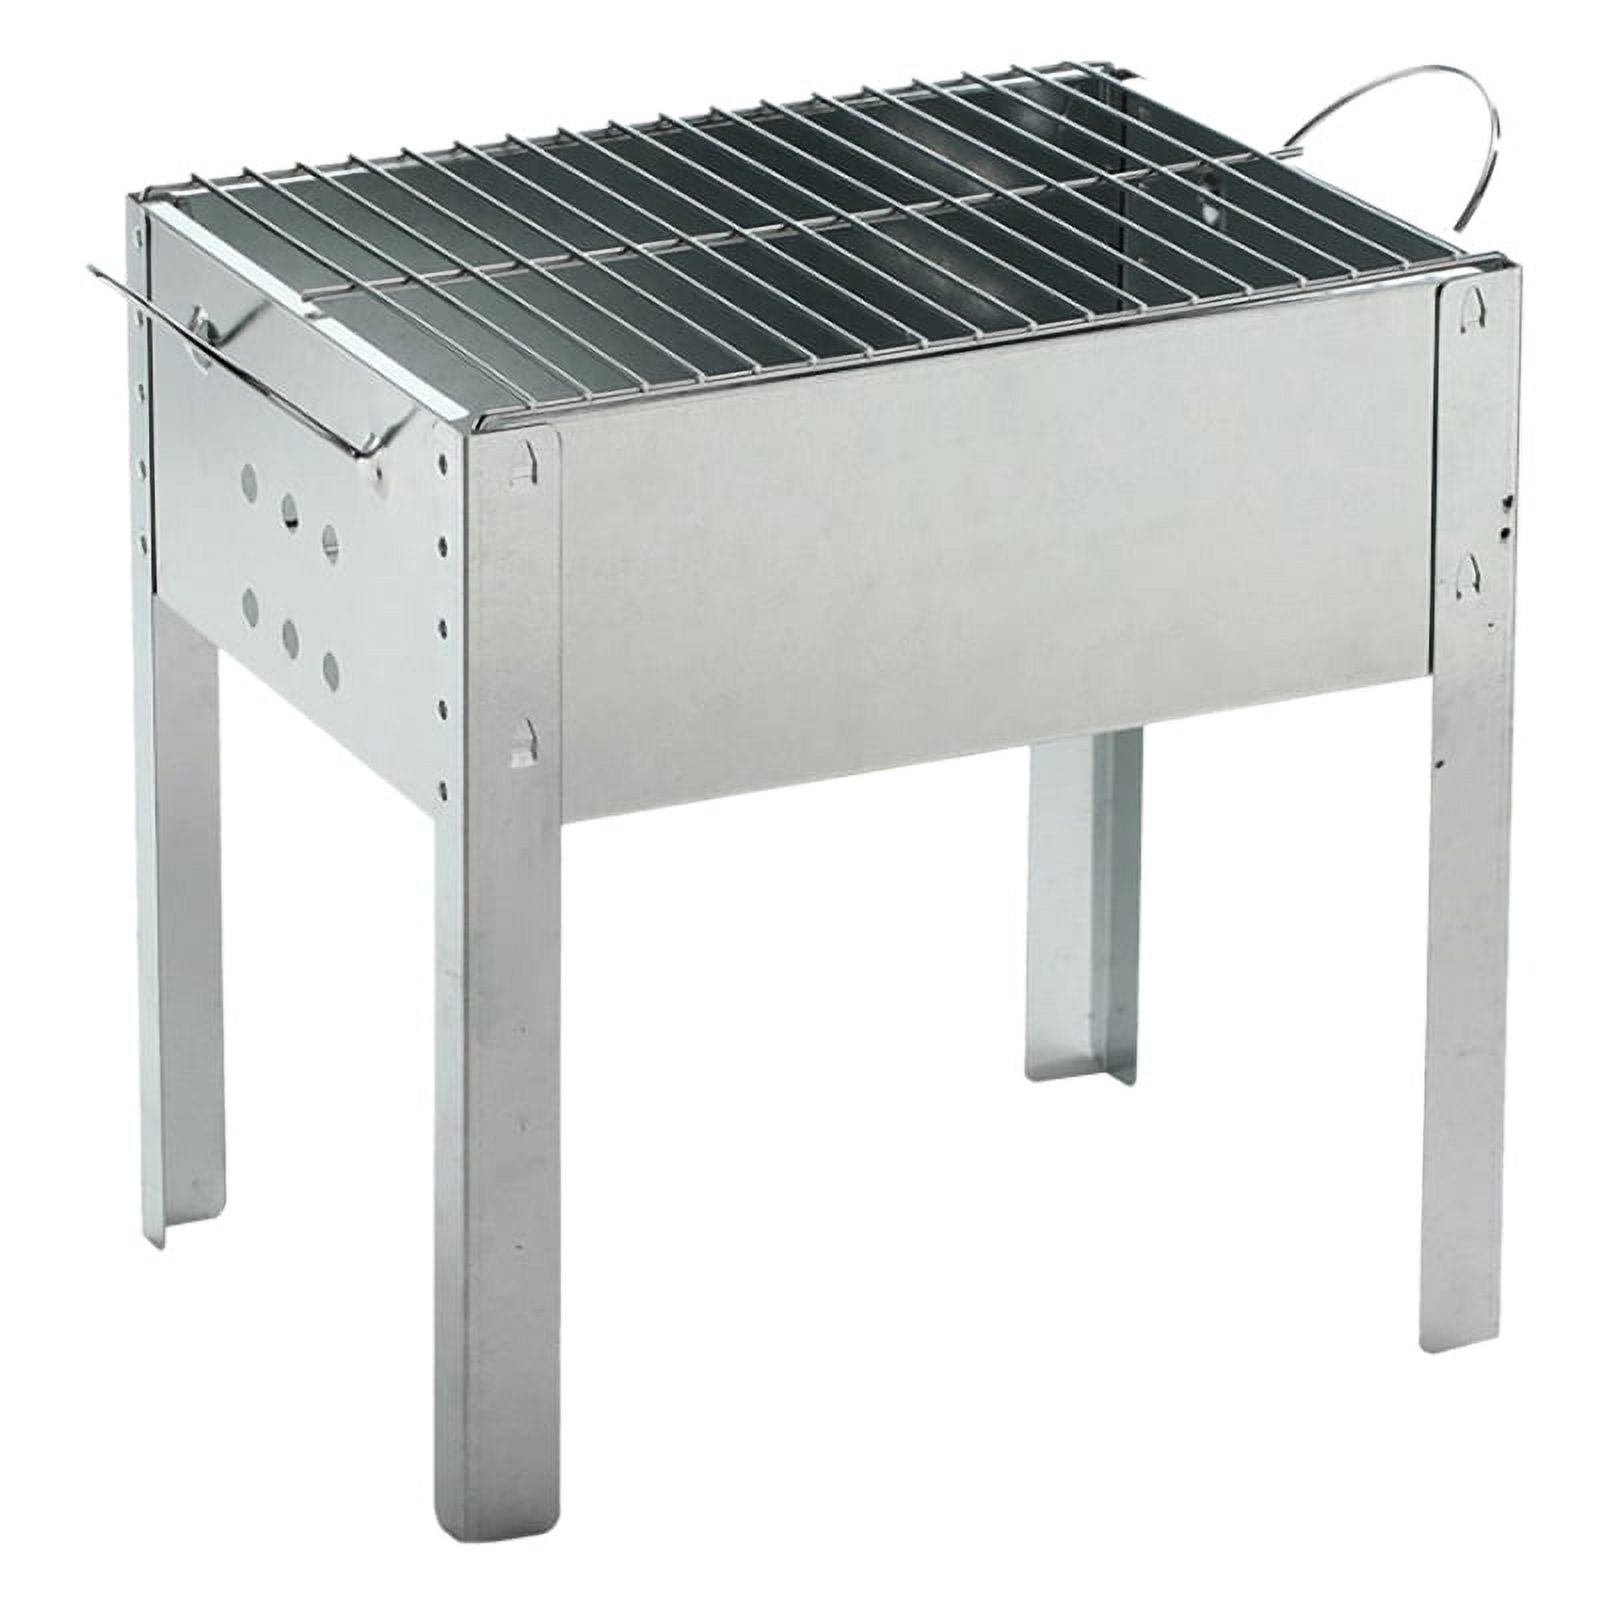 Outdoor BBQ Grill Household Portable Charcoal Grill Folding Outdoor Grill Disassembled Stainless Steel - image 1 of 8